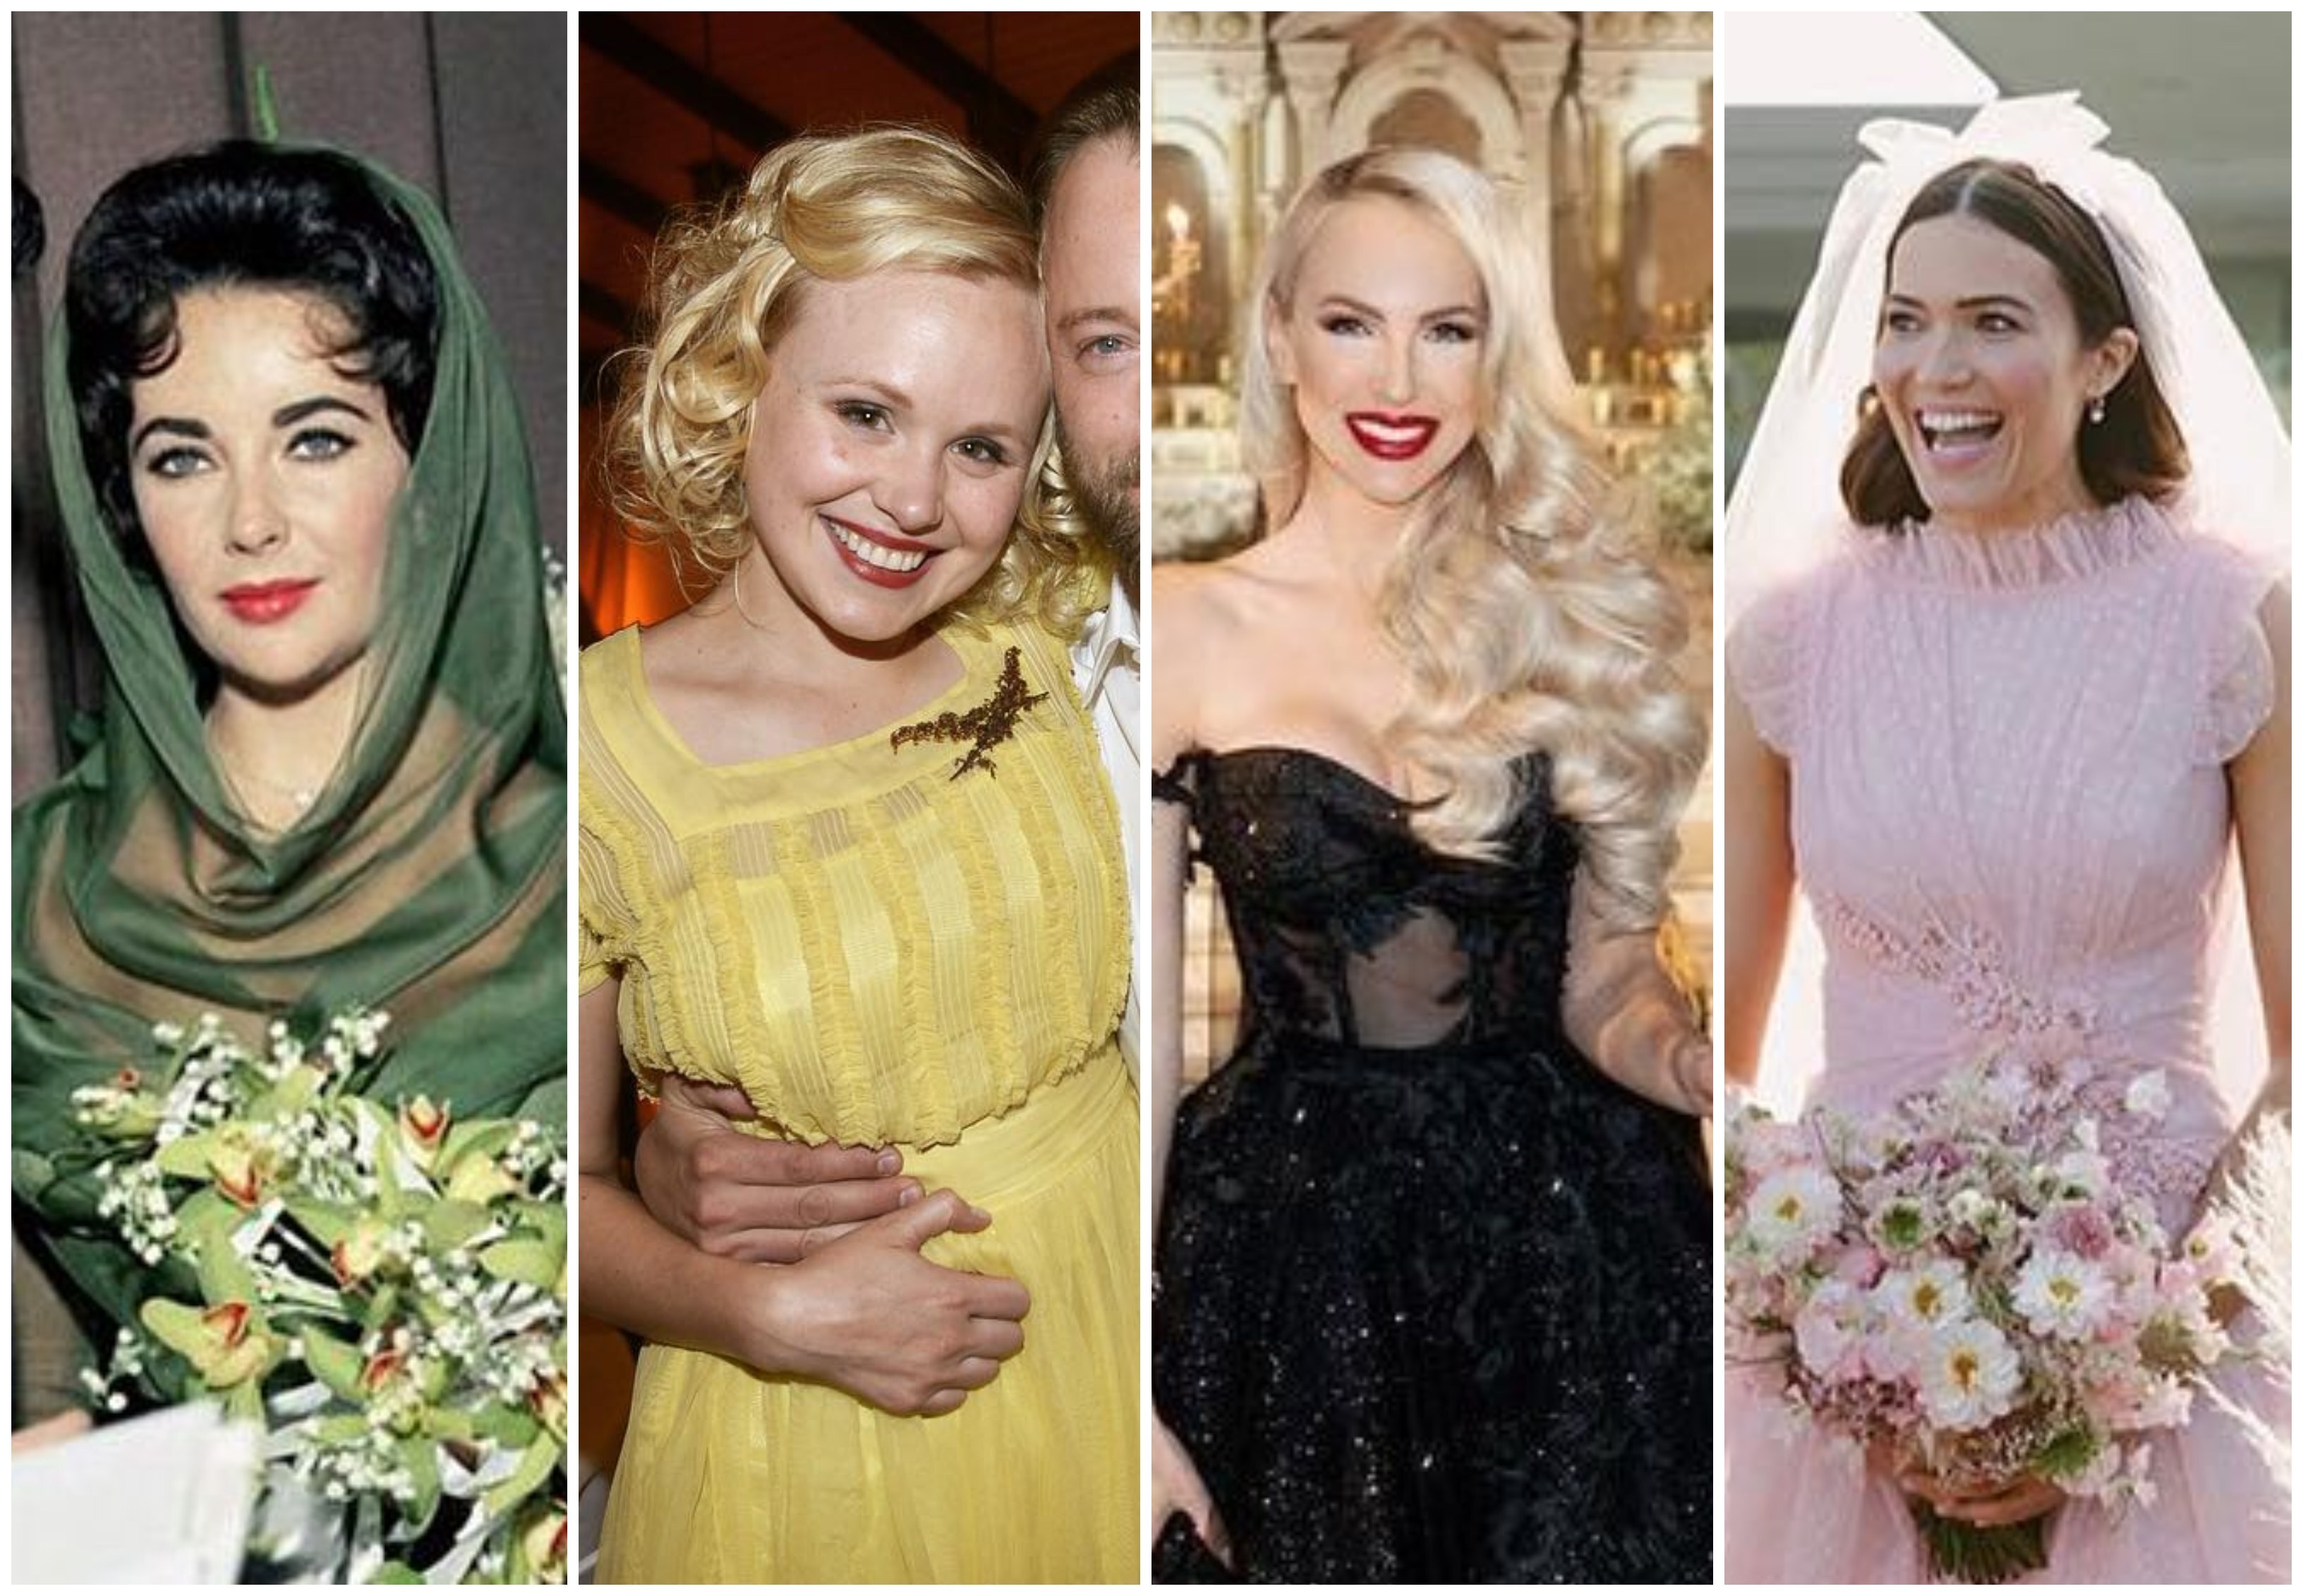 Elizabeth Taylor, Alison Pill, Christine Quinn and Mandy Moore all opted for colourful wedding gowns instead of the traditional white. Photos: @elizabethtaylor, @msalisonpill, @thechristinequinn, @mandymooremm/Instagram